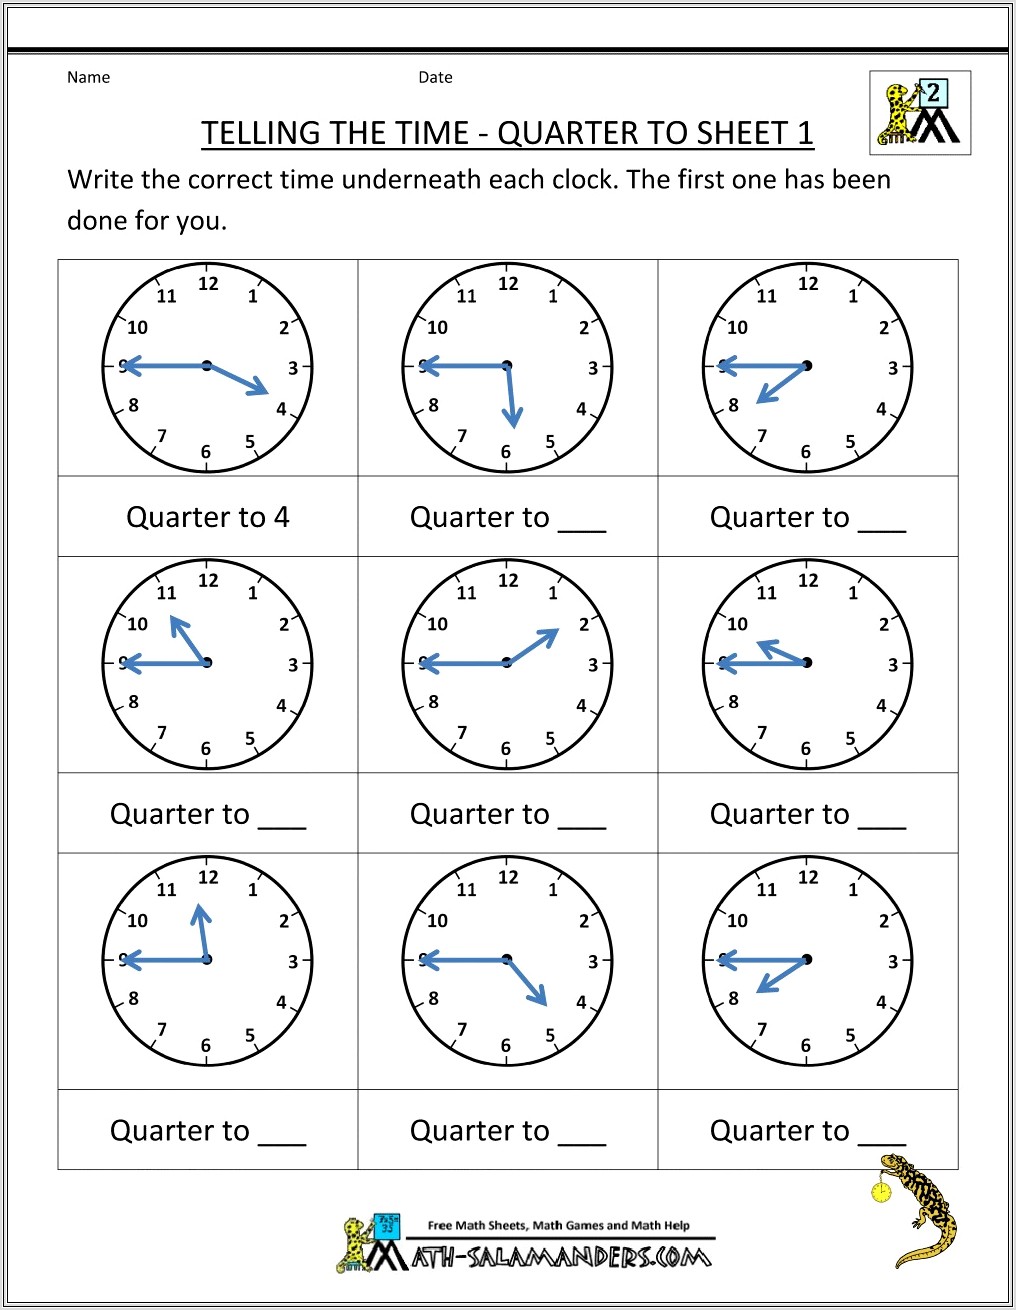 Free Math Worksheets On Time And Money